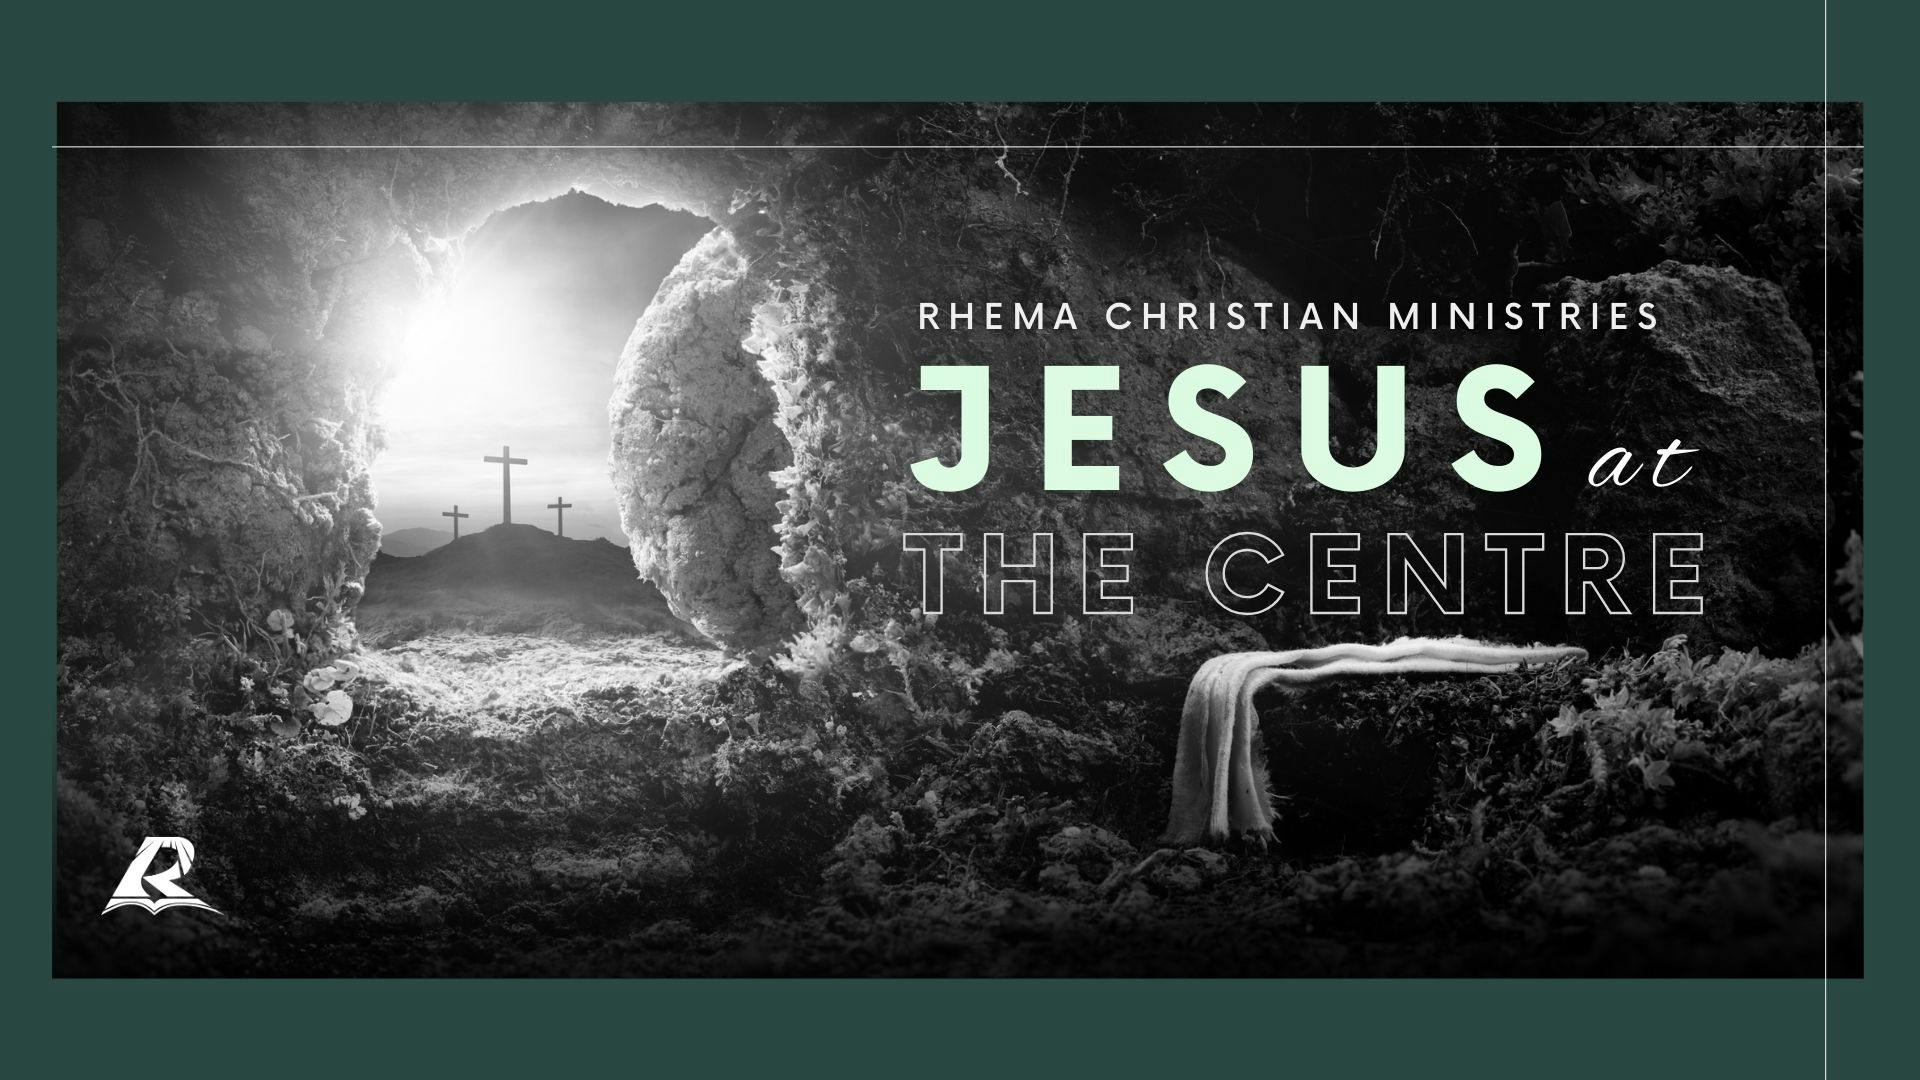 JESUS AT THE CENTRE